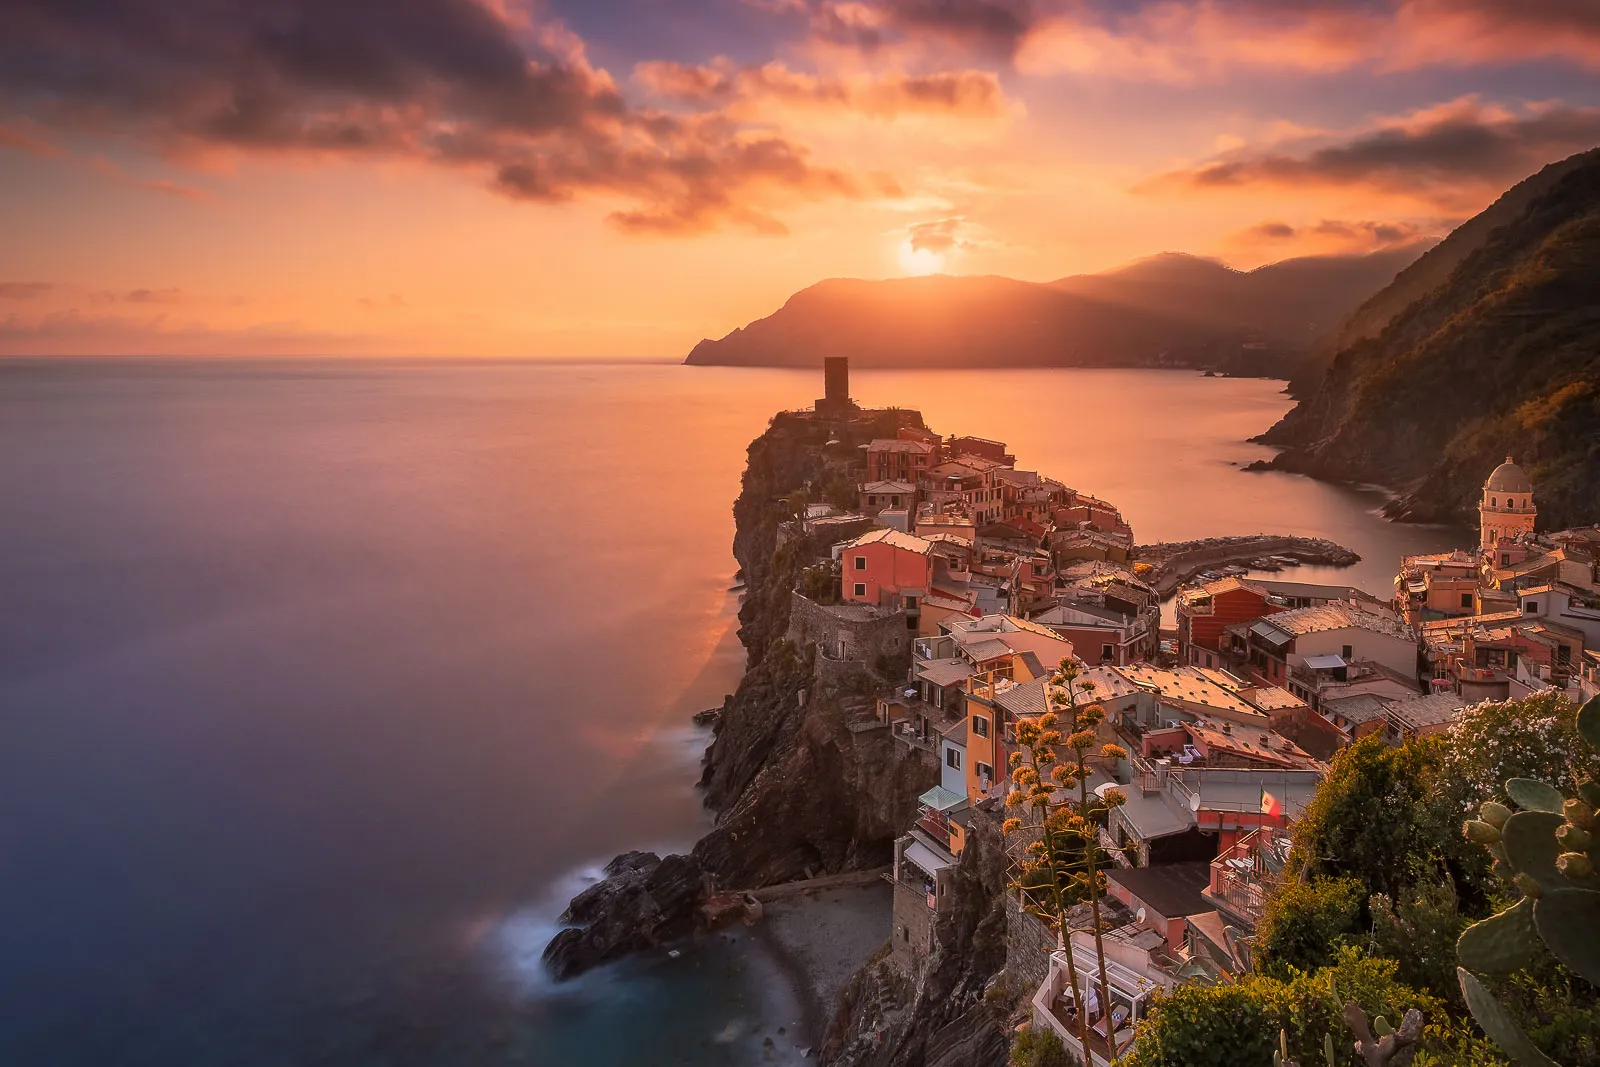 A spectacular golden sunset from the iconic view point in Vernazza, Cinque Terre.